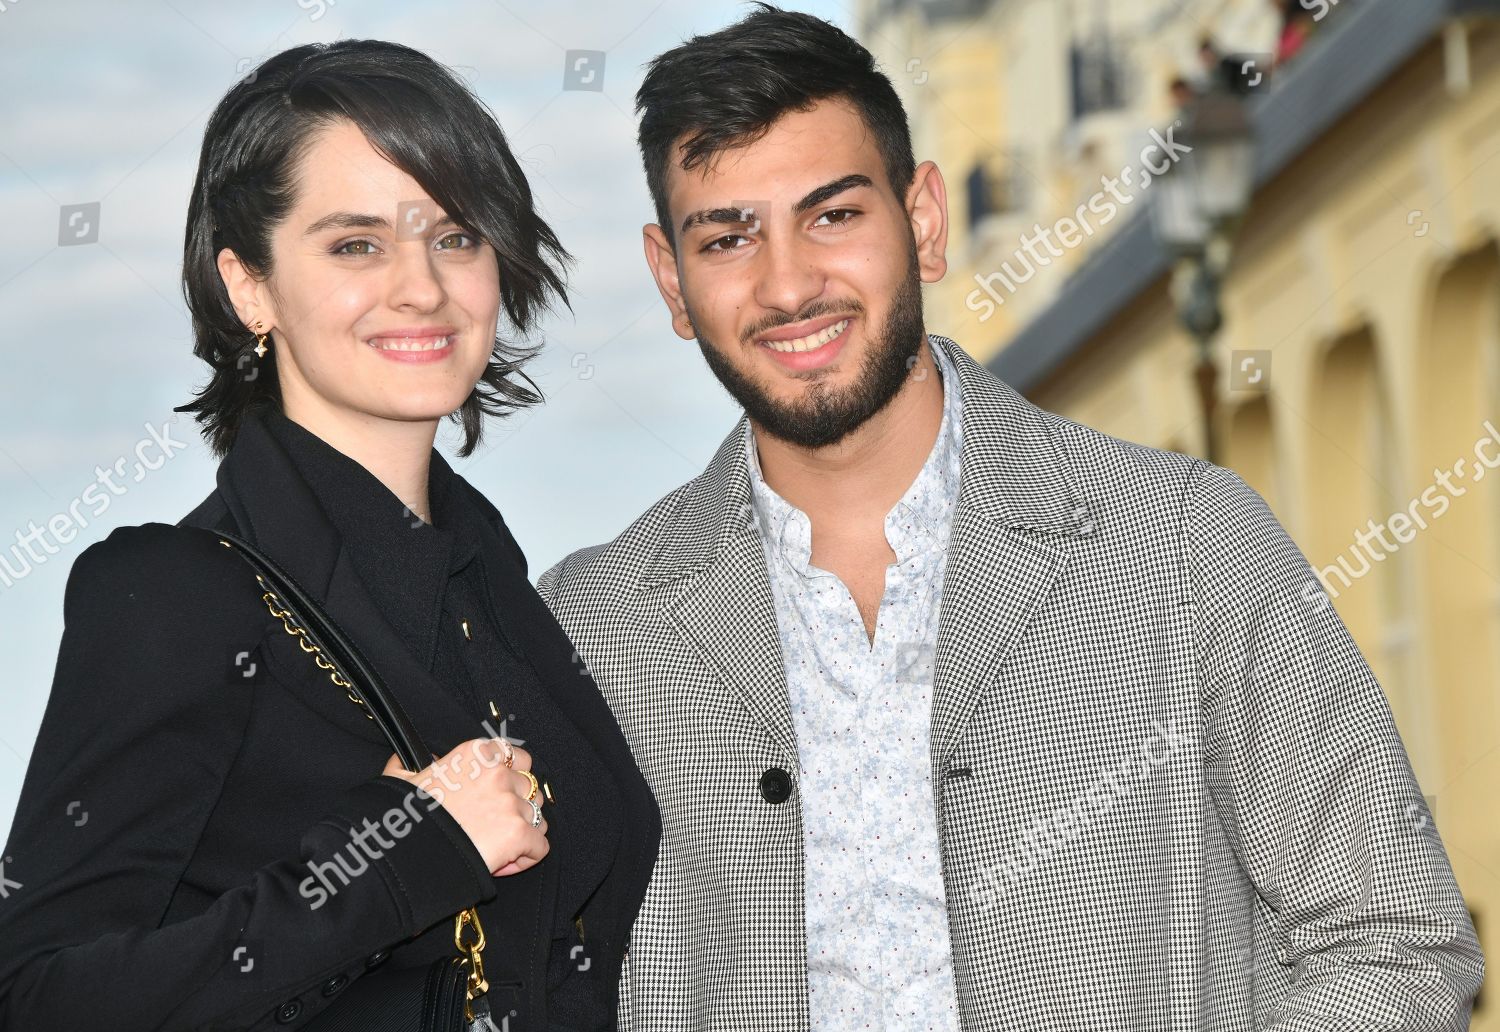 Noemie Merlant and Artur Vasile attending the 34th Cabourg Film